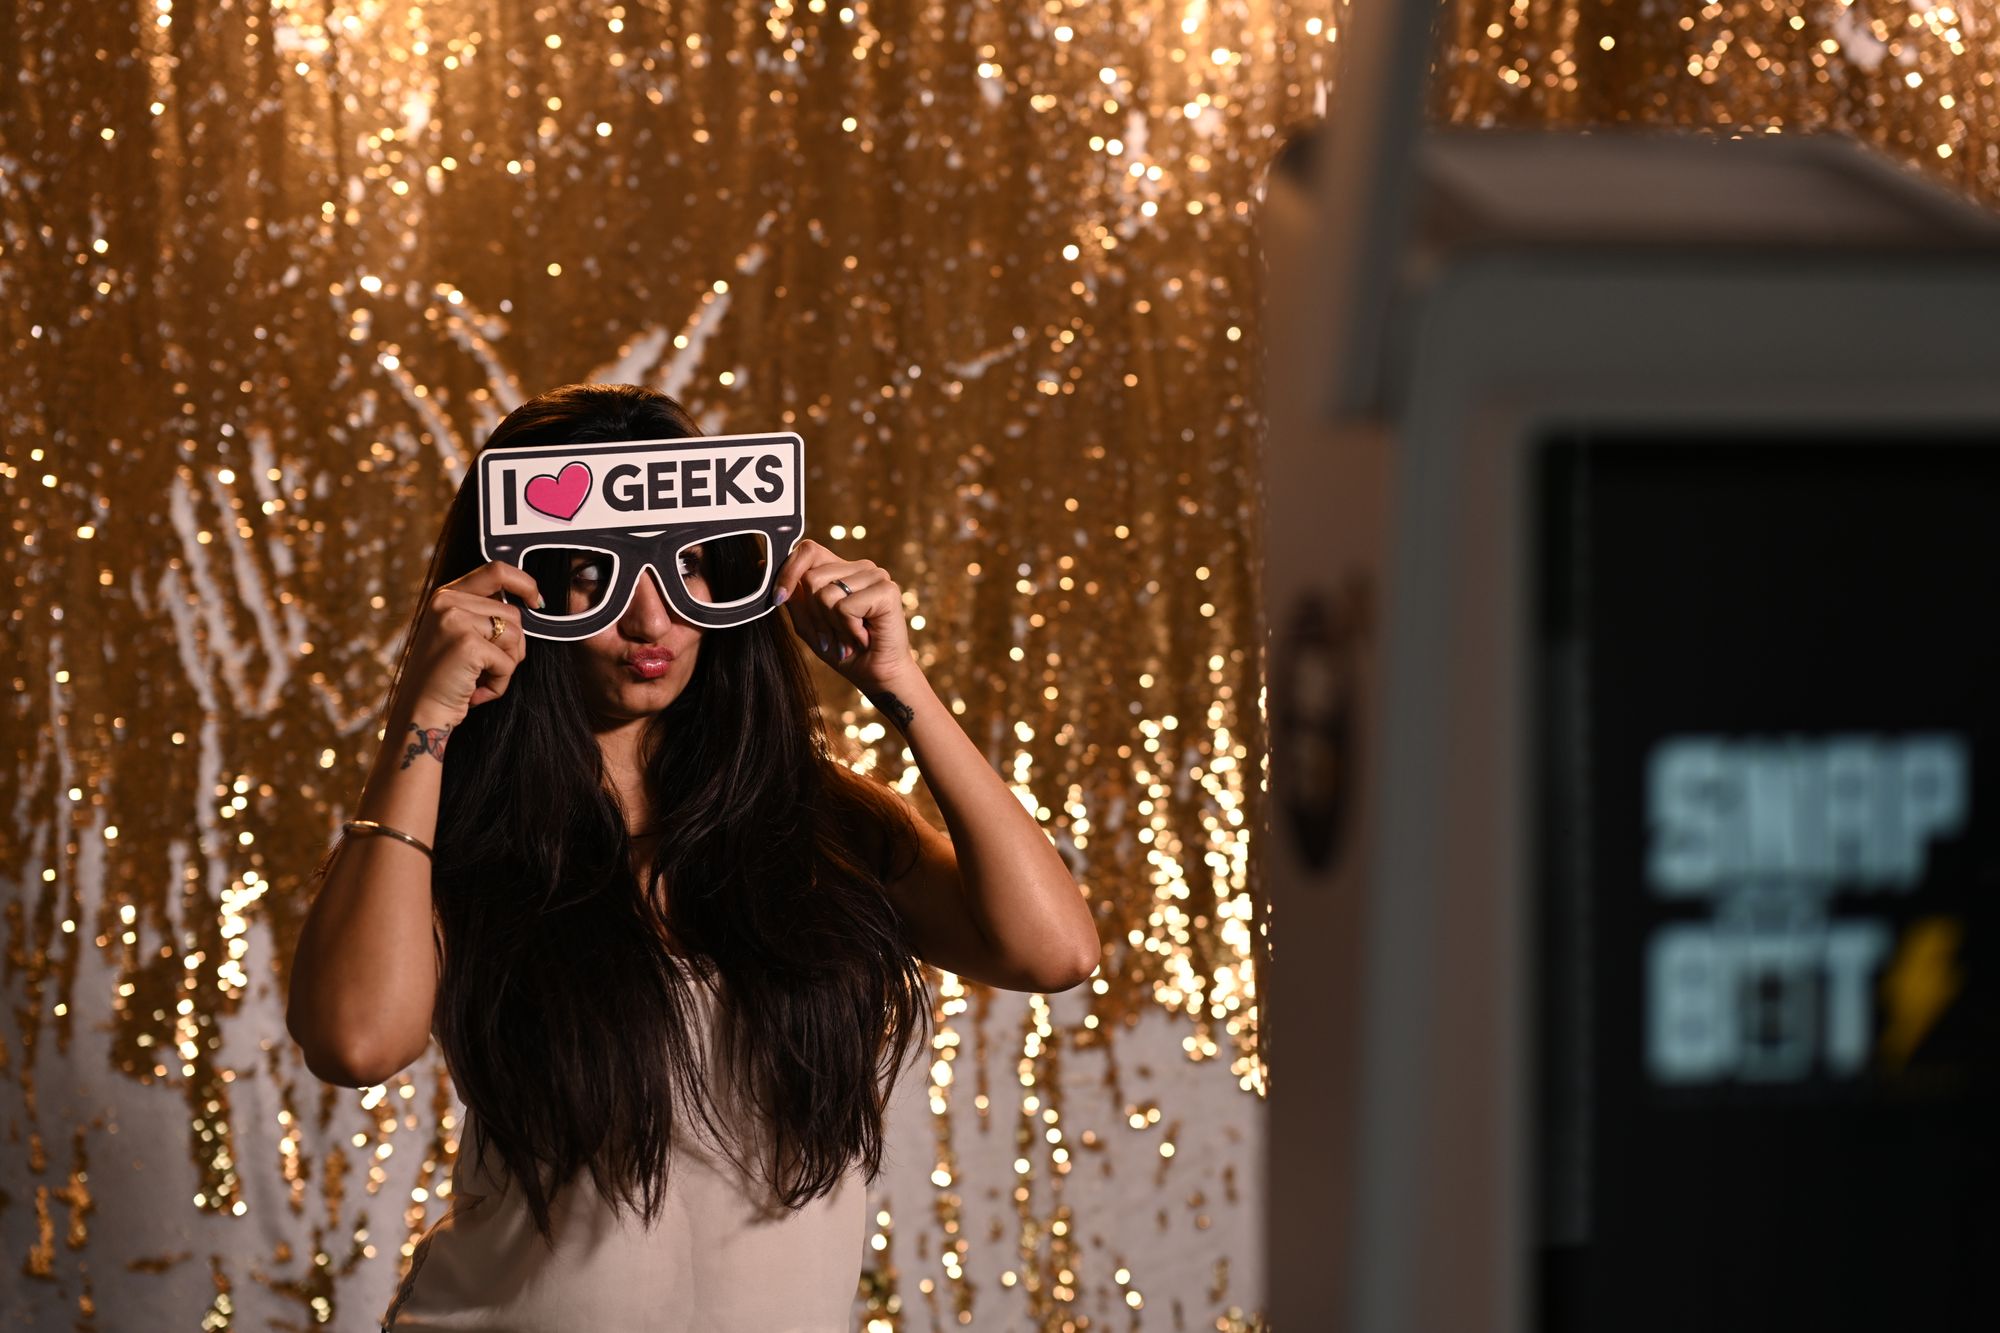 Strike a pose! Here's why every event needs a photobooth